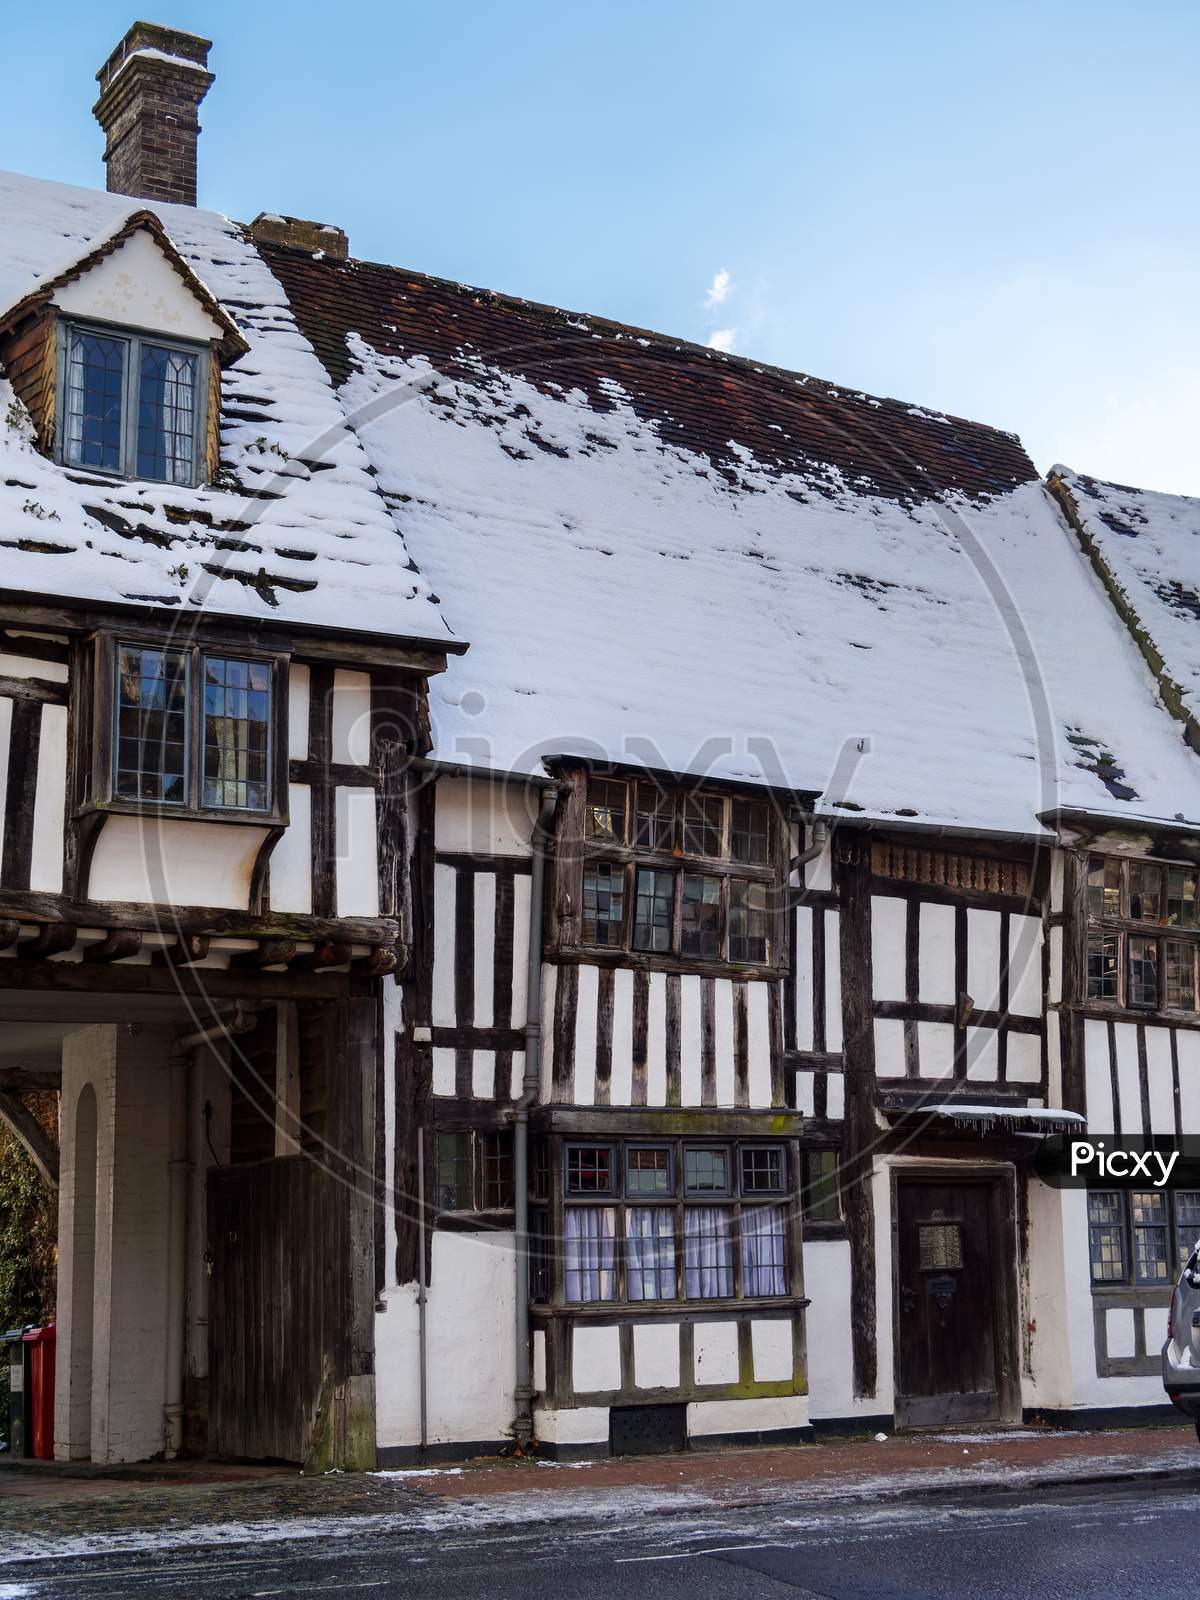 East Grinstead, West Sussex/Uk - February 27 : View Of An Old Building In The High Street East Grinstead On February 27, 2018